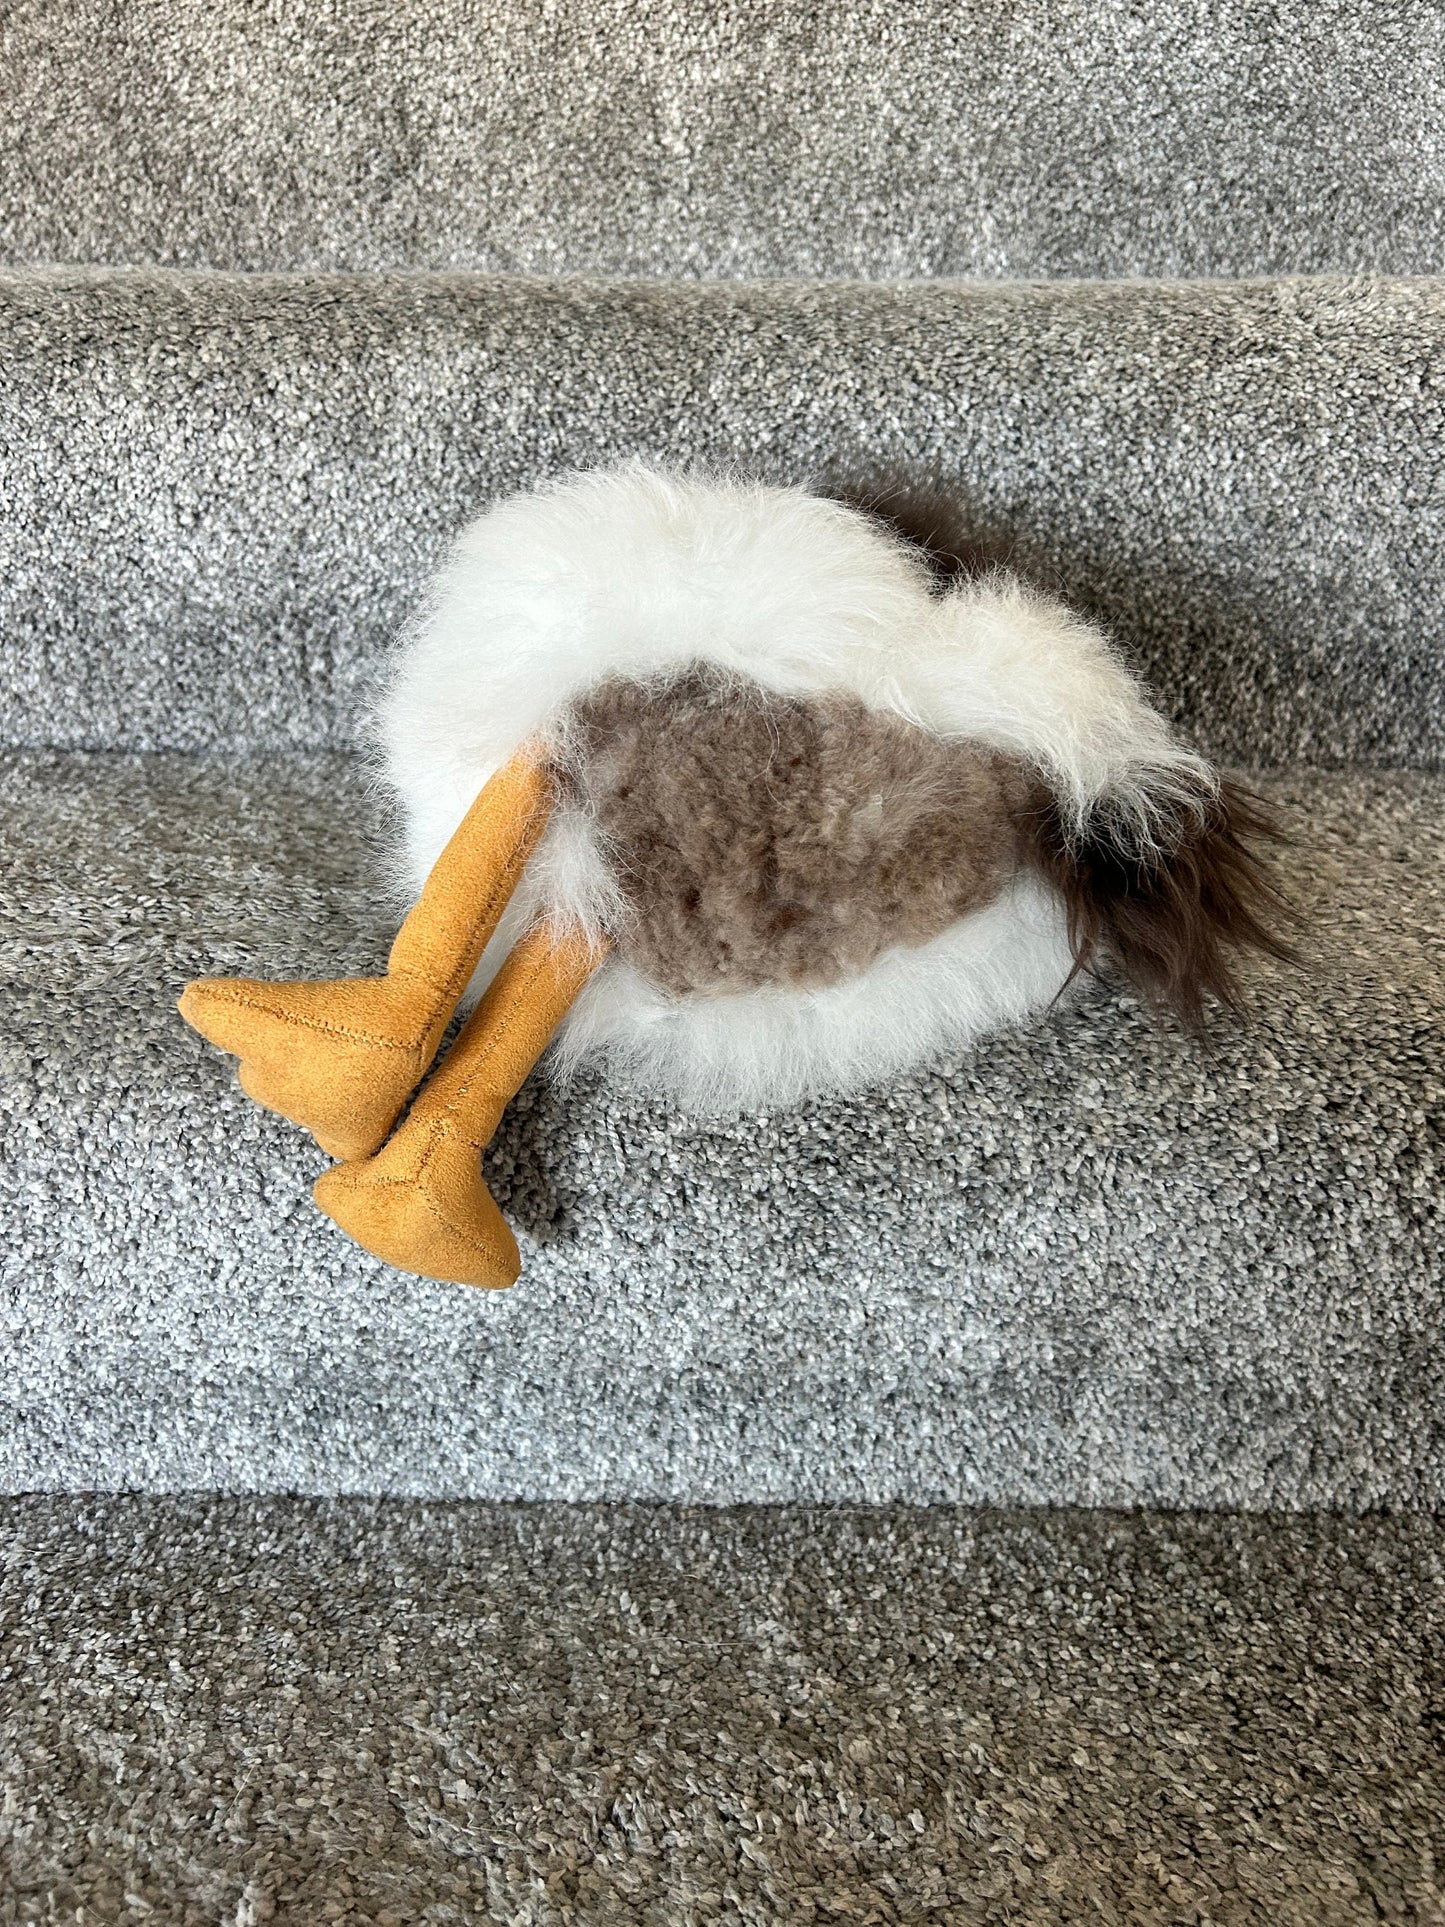 Baby Chicken, Alpaca Fur Stuffed Animal, Plush Chicken, Adorable Plush Toys, Presents for Sister, Unique Holiday Gift, Great Gifts for Teens